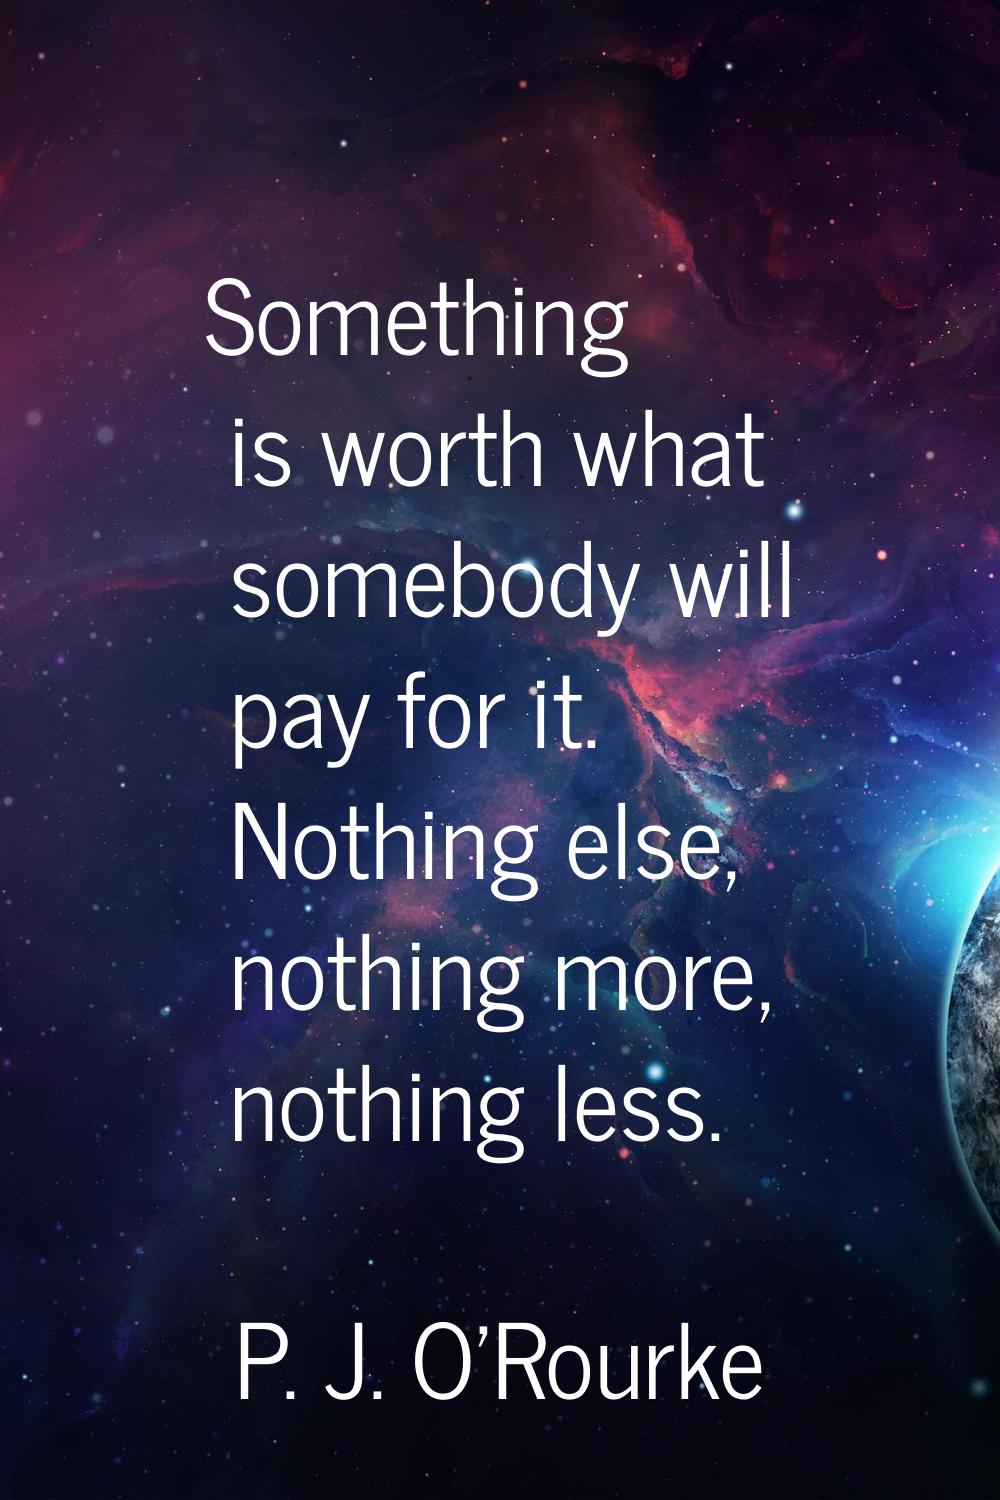 Something is worth what somebody will pay for it. Nothing else, nothing more, nothing less.